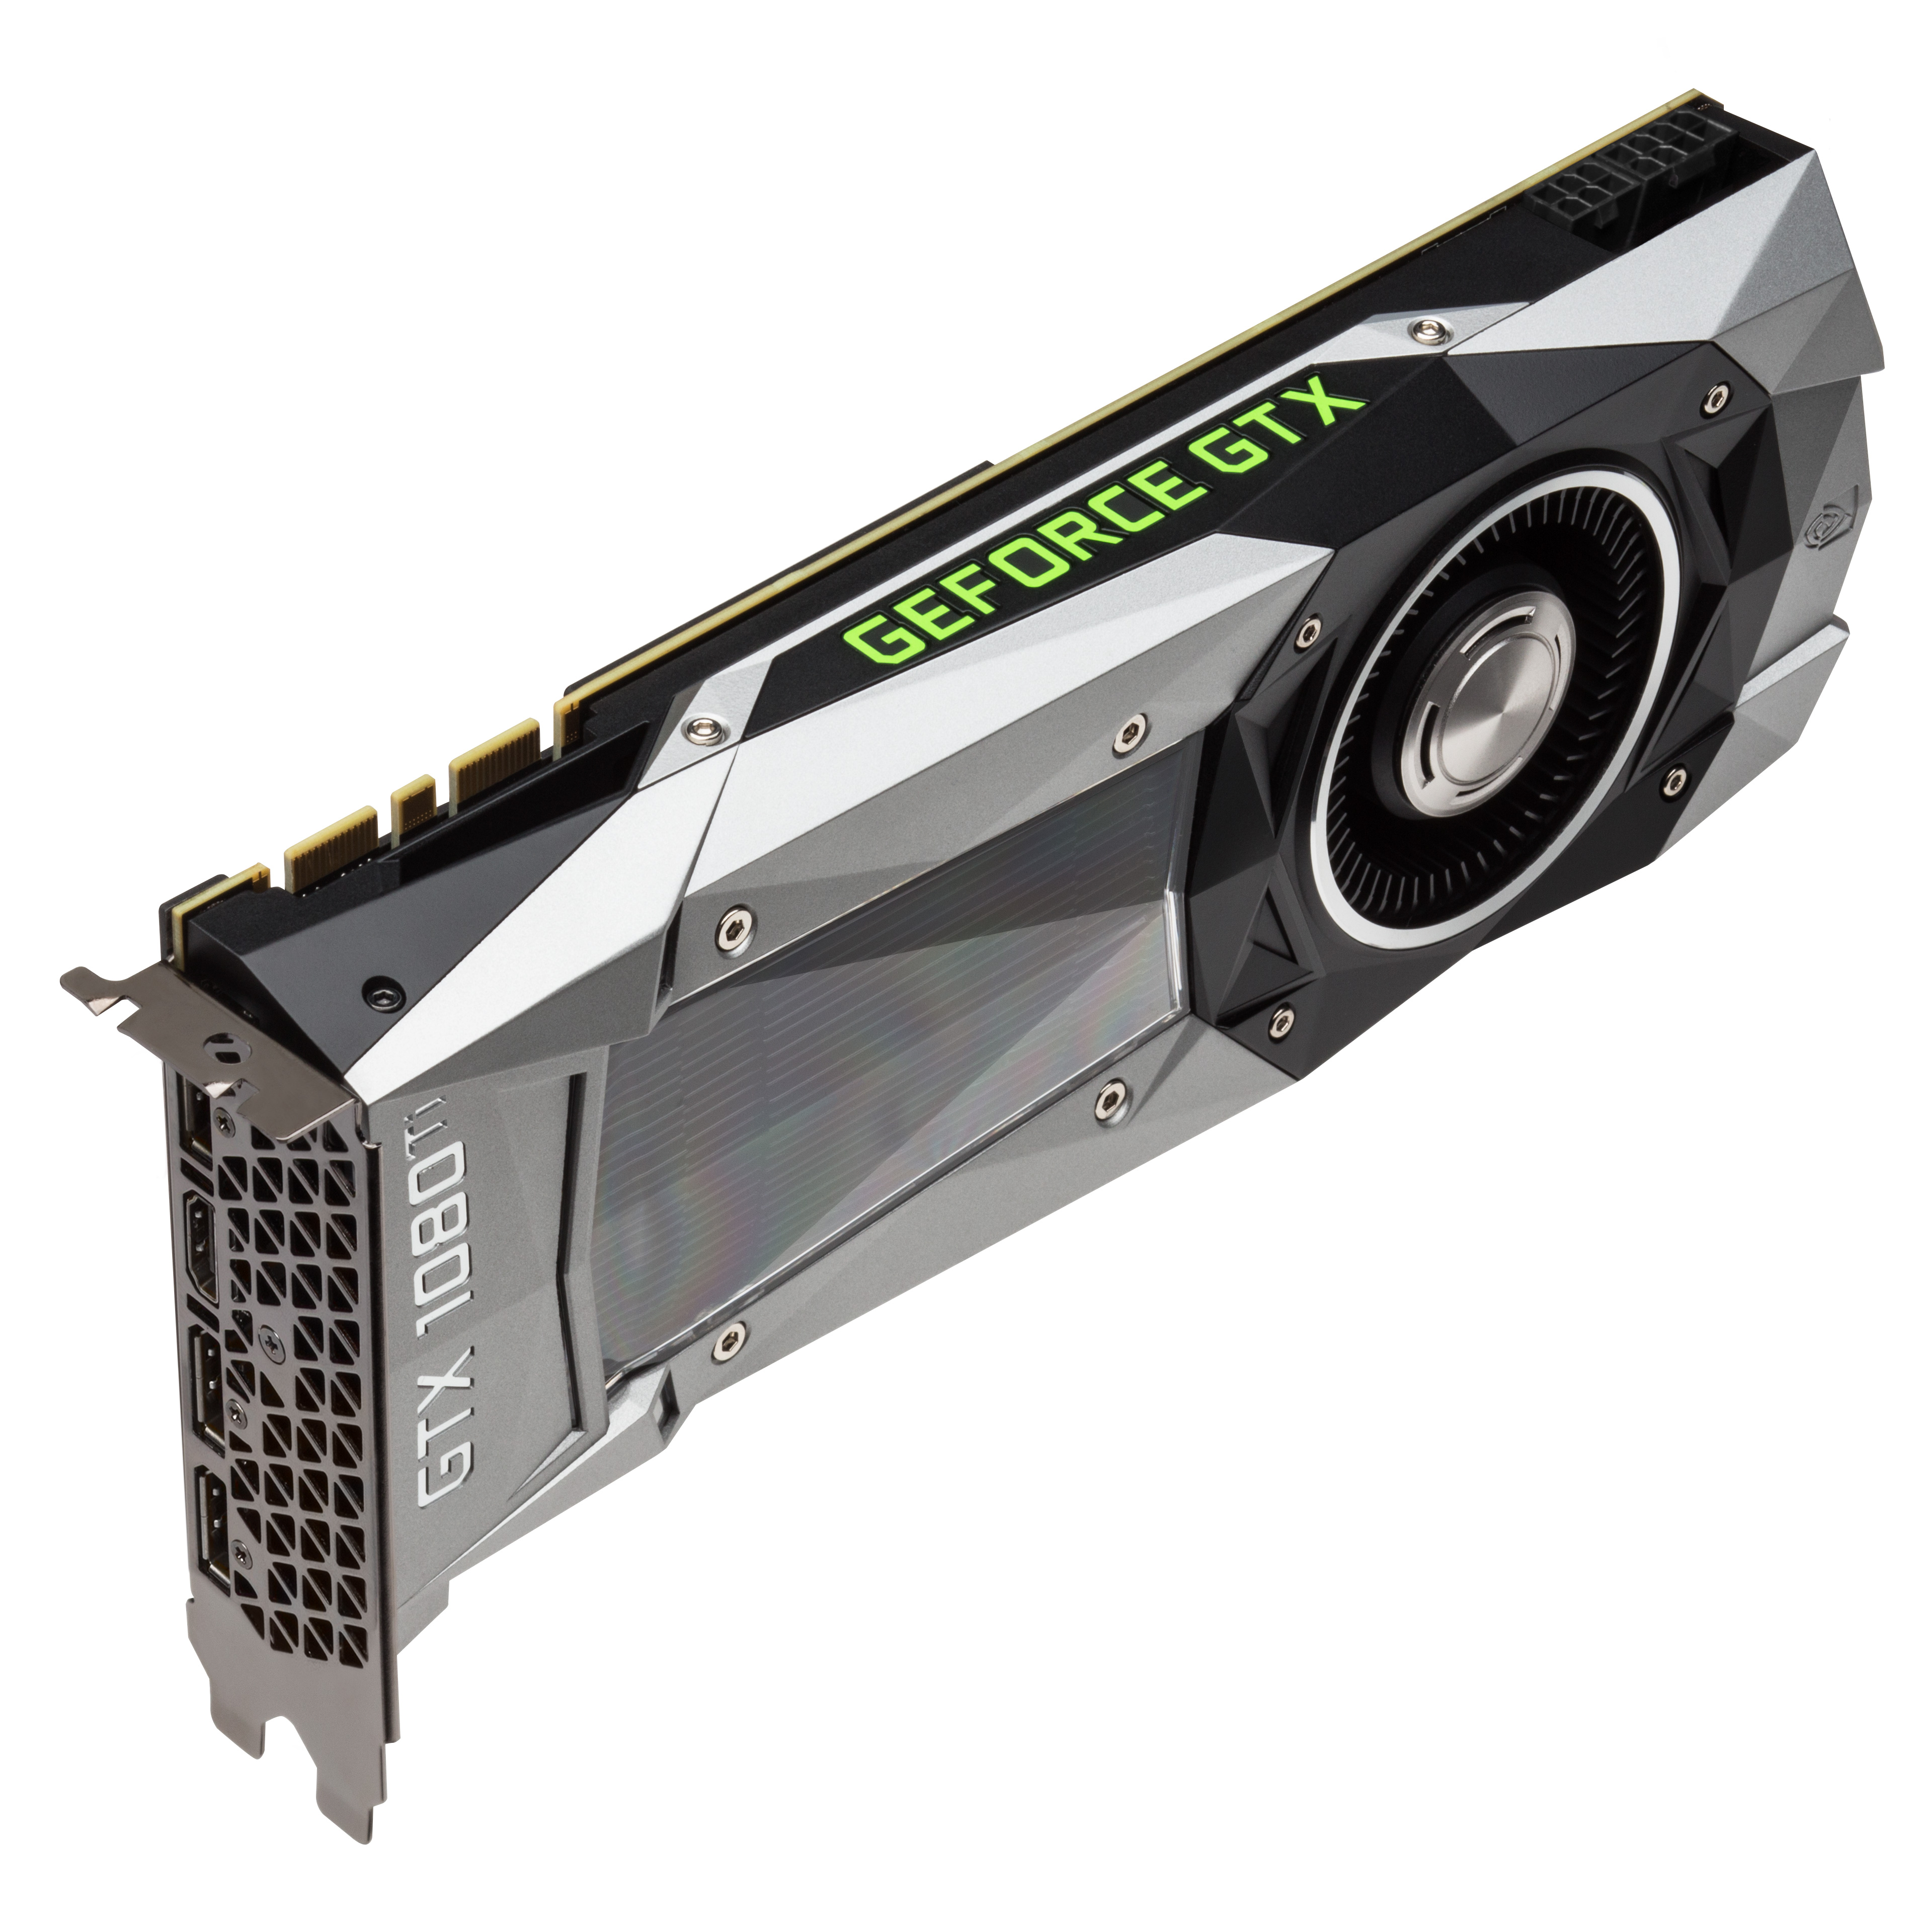 The NVIDIA GeForce GTX 1080 Ti Edition Review: for Better Performance